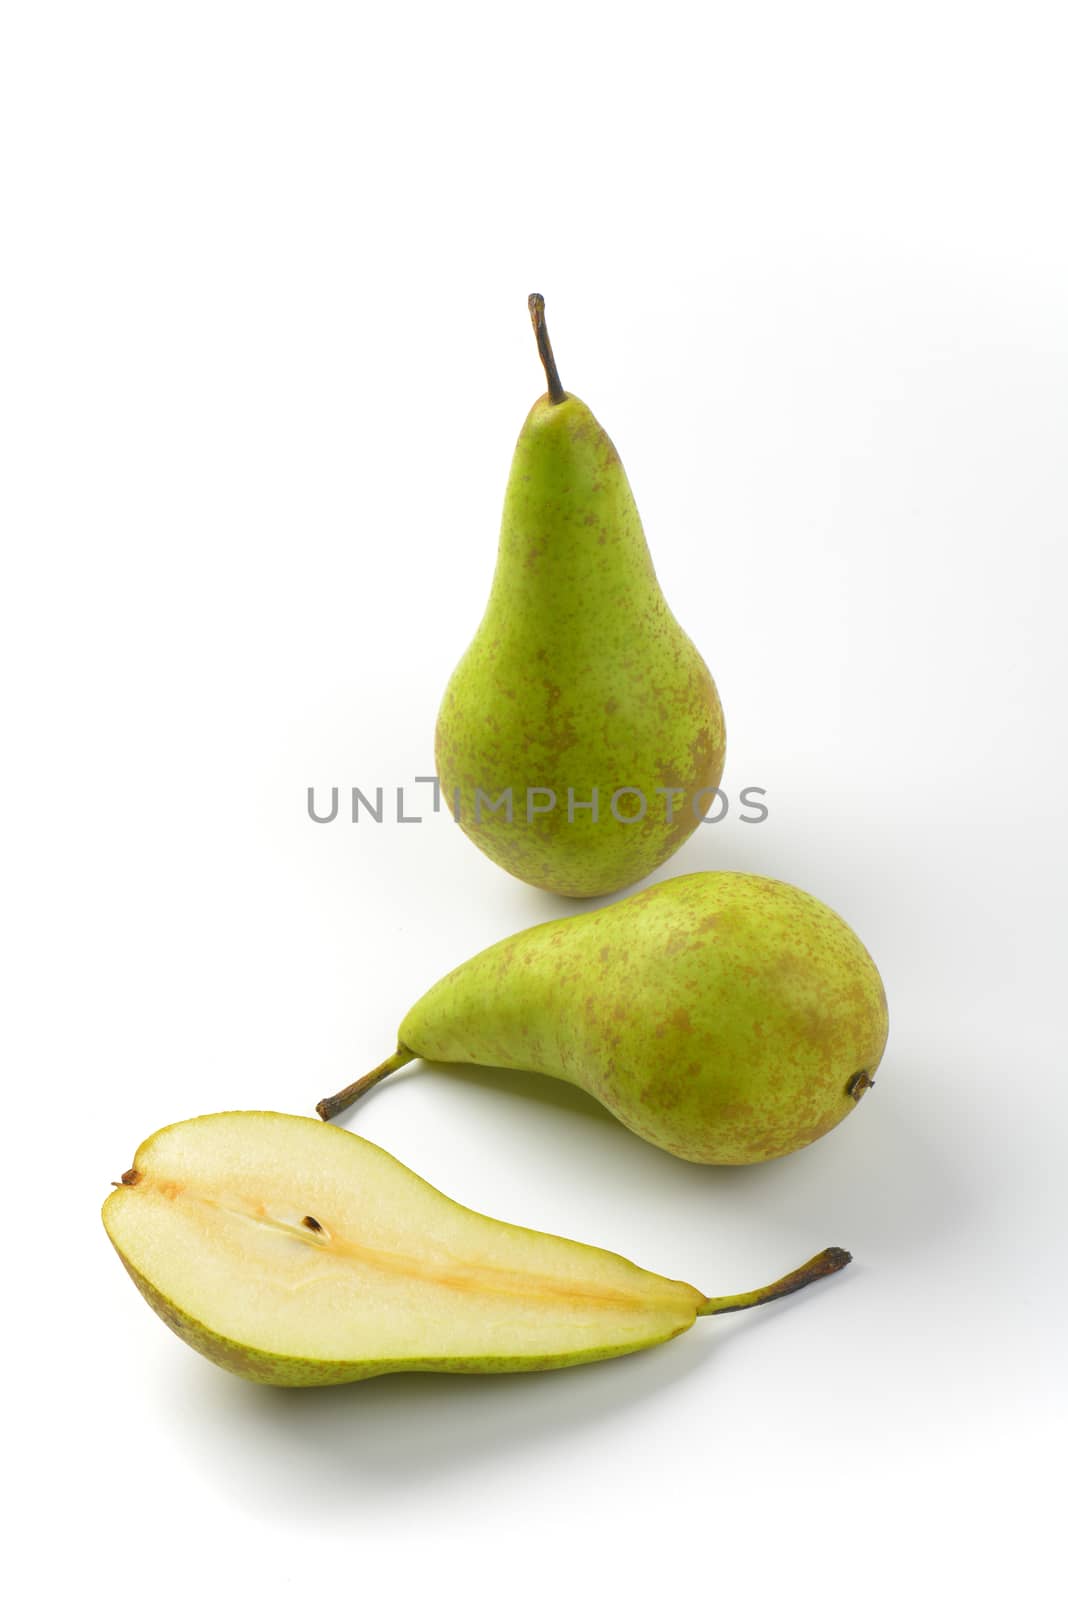 two and a half pears by Digifoodstock